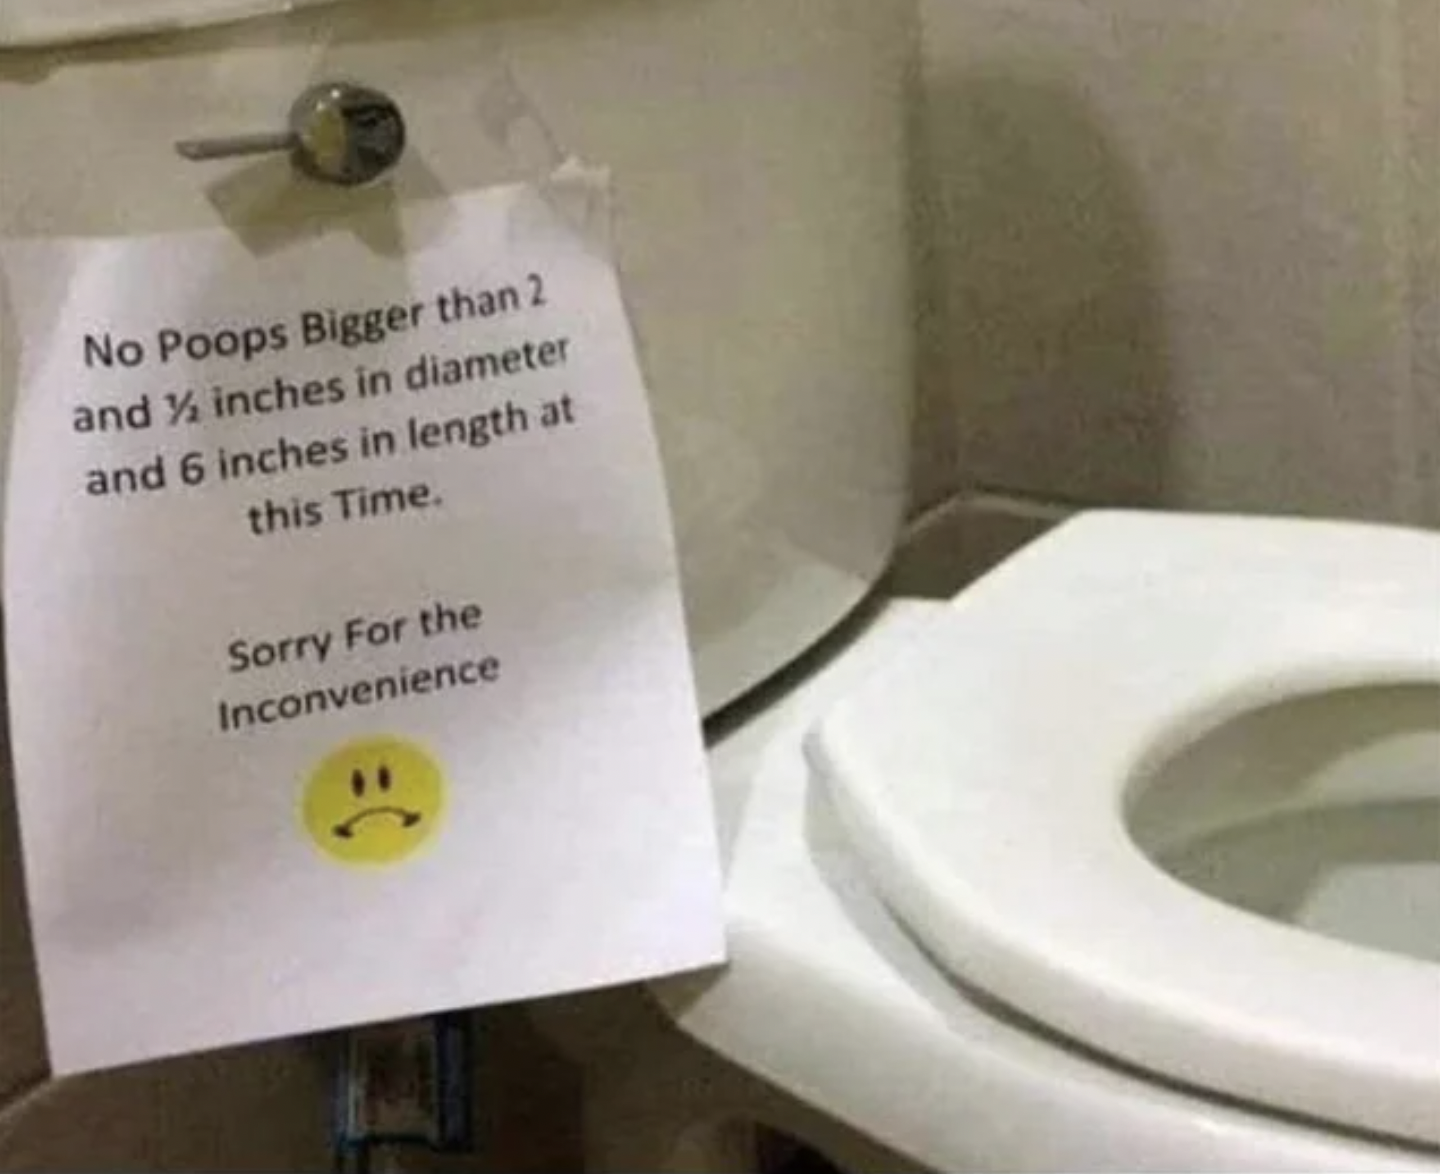 Oddly Specific Pictures - 7 inch diameter poop - No Poops Bigger than 2 and inches in diameter and 6 inches in length at this Time. Sorry For the Inconvenience